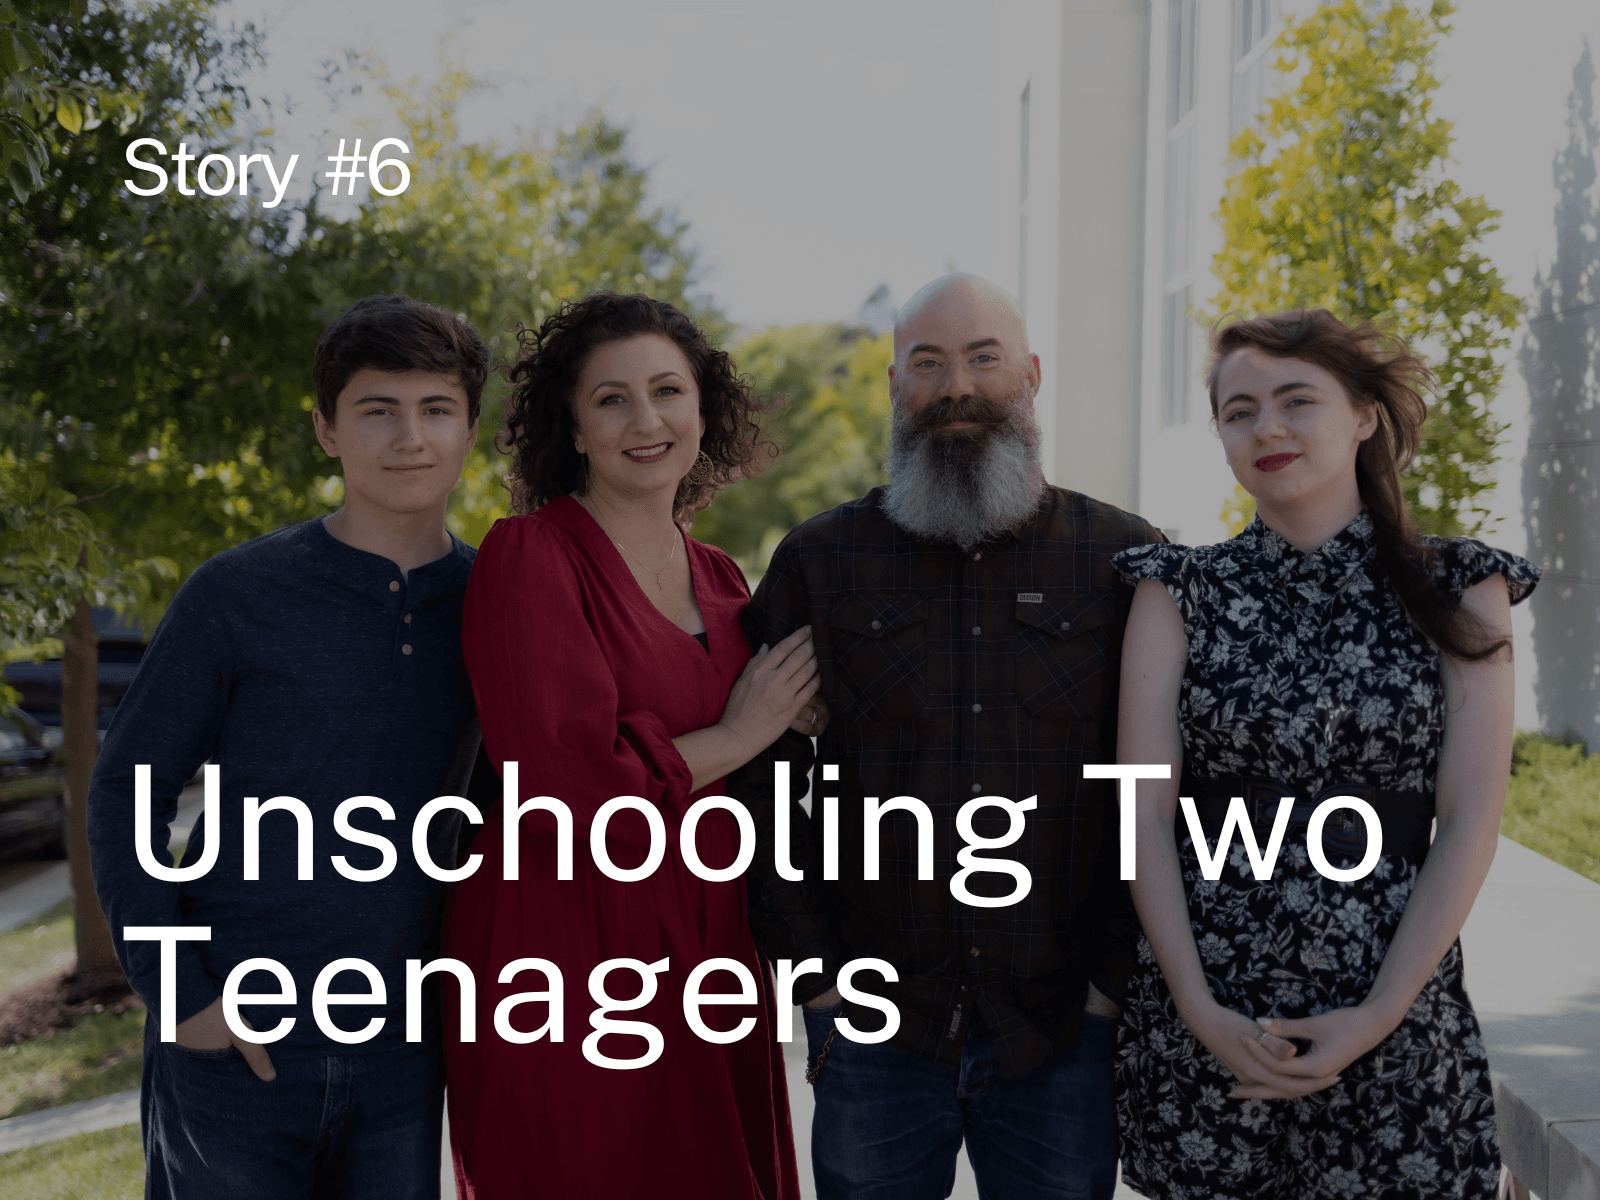 Cherron's Journey from School at Home to Unschooling Two Teenagers